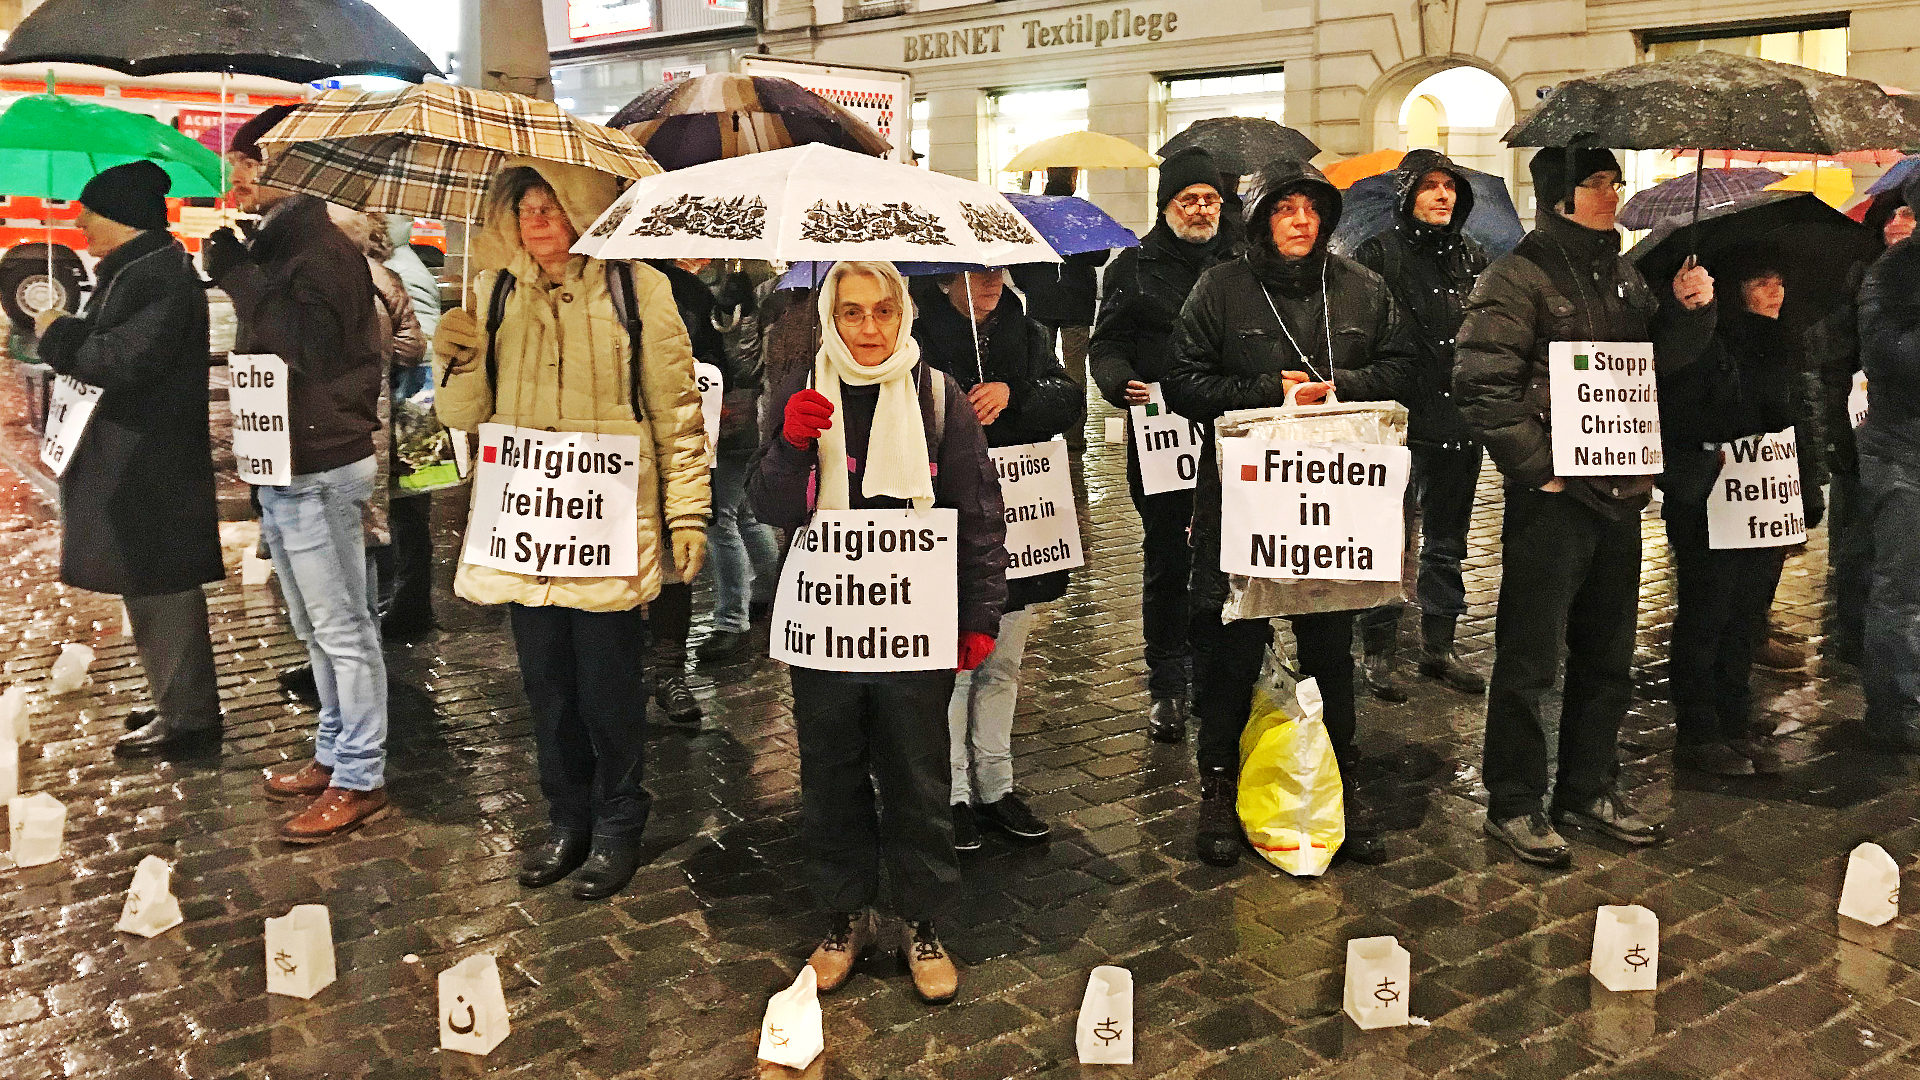 Vigil in St. Gallen for persecuted Christians